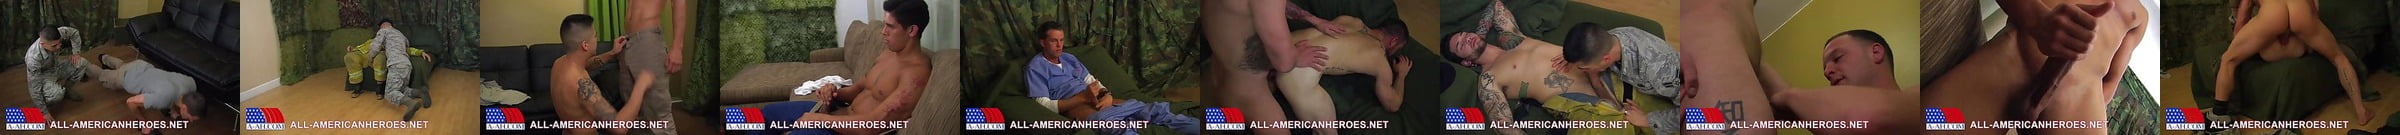 All American Heroes Gay Porn Videos All Xhamster